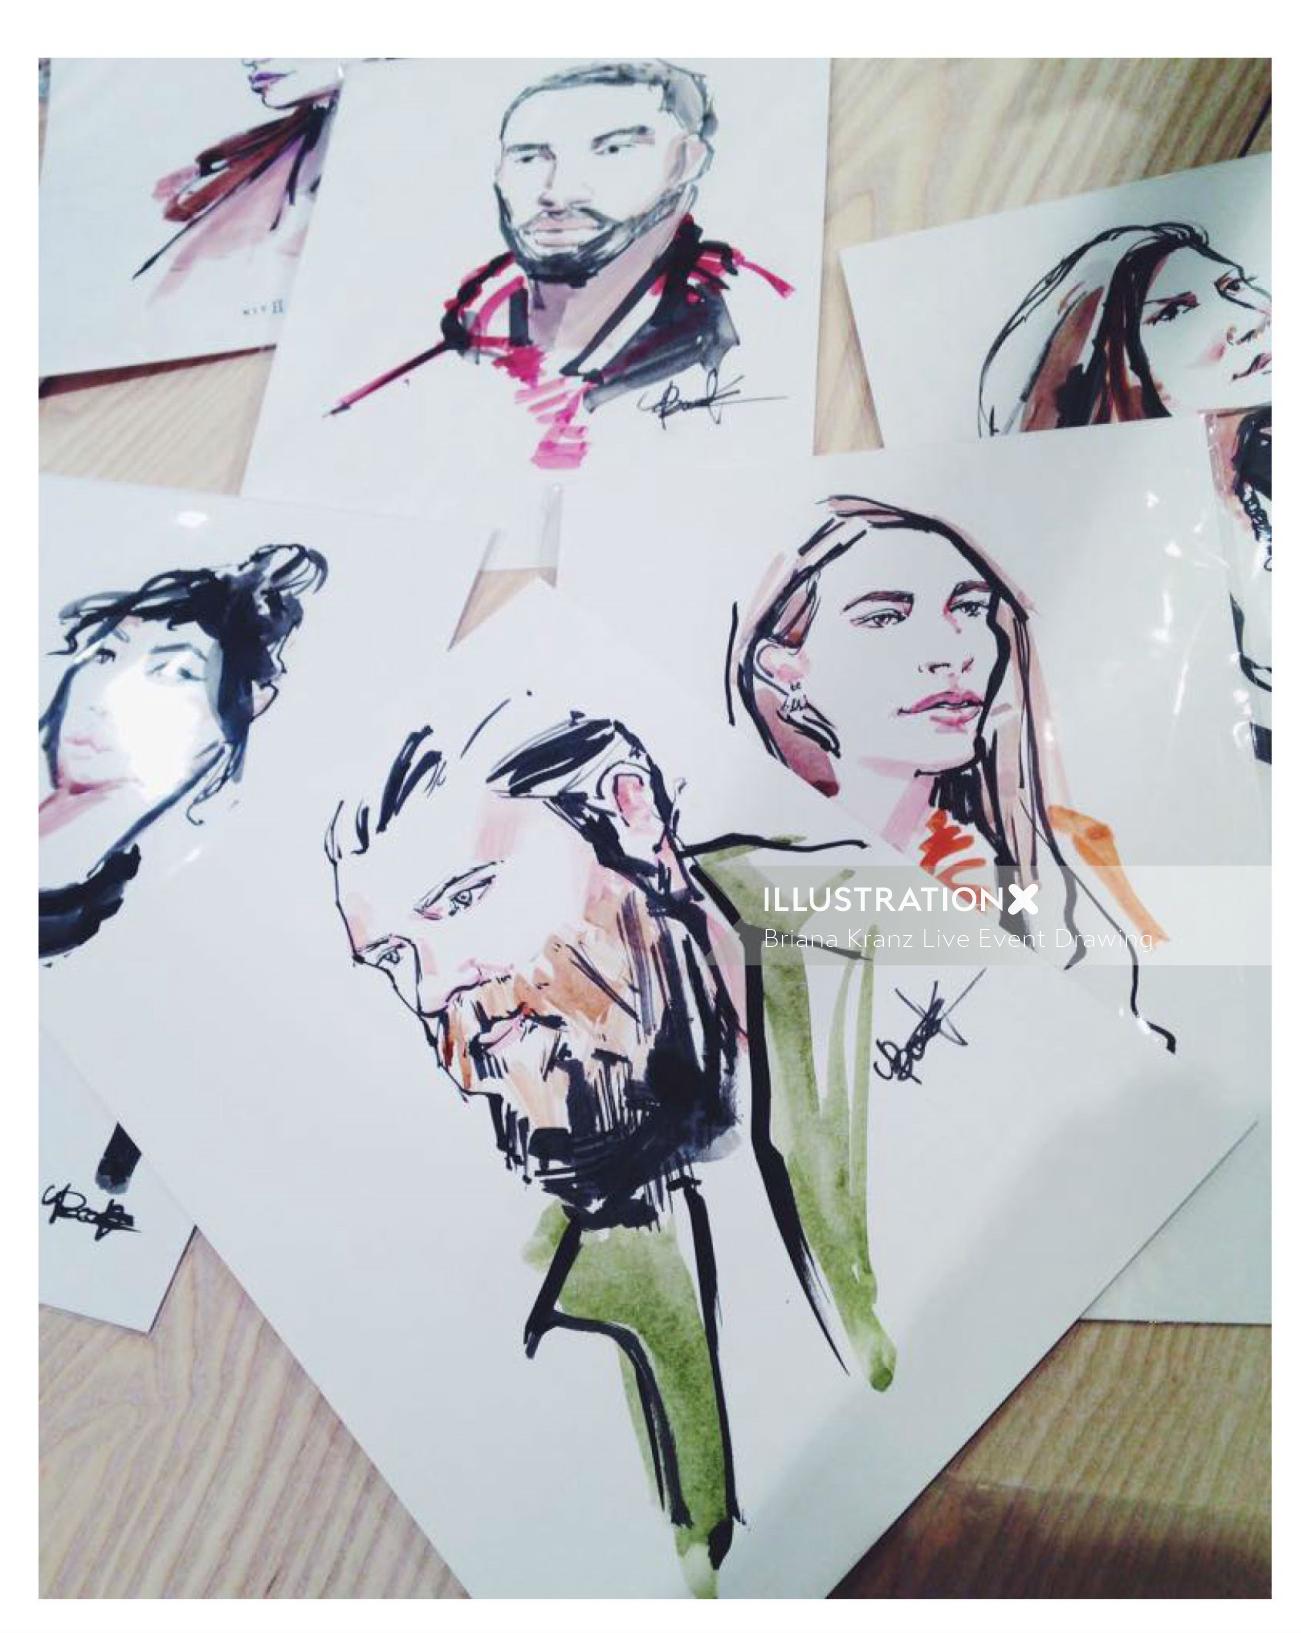 A group of portrait drawings